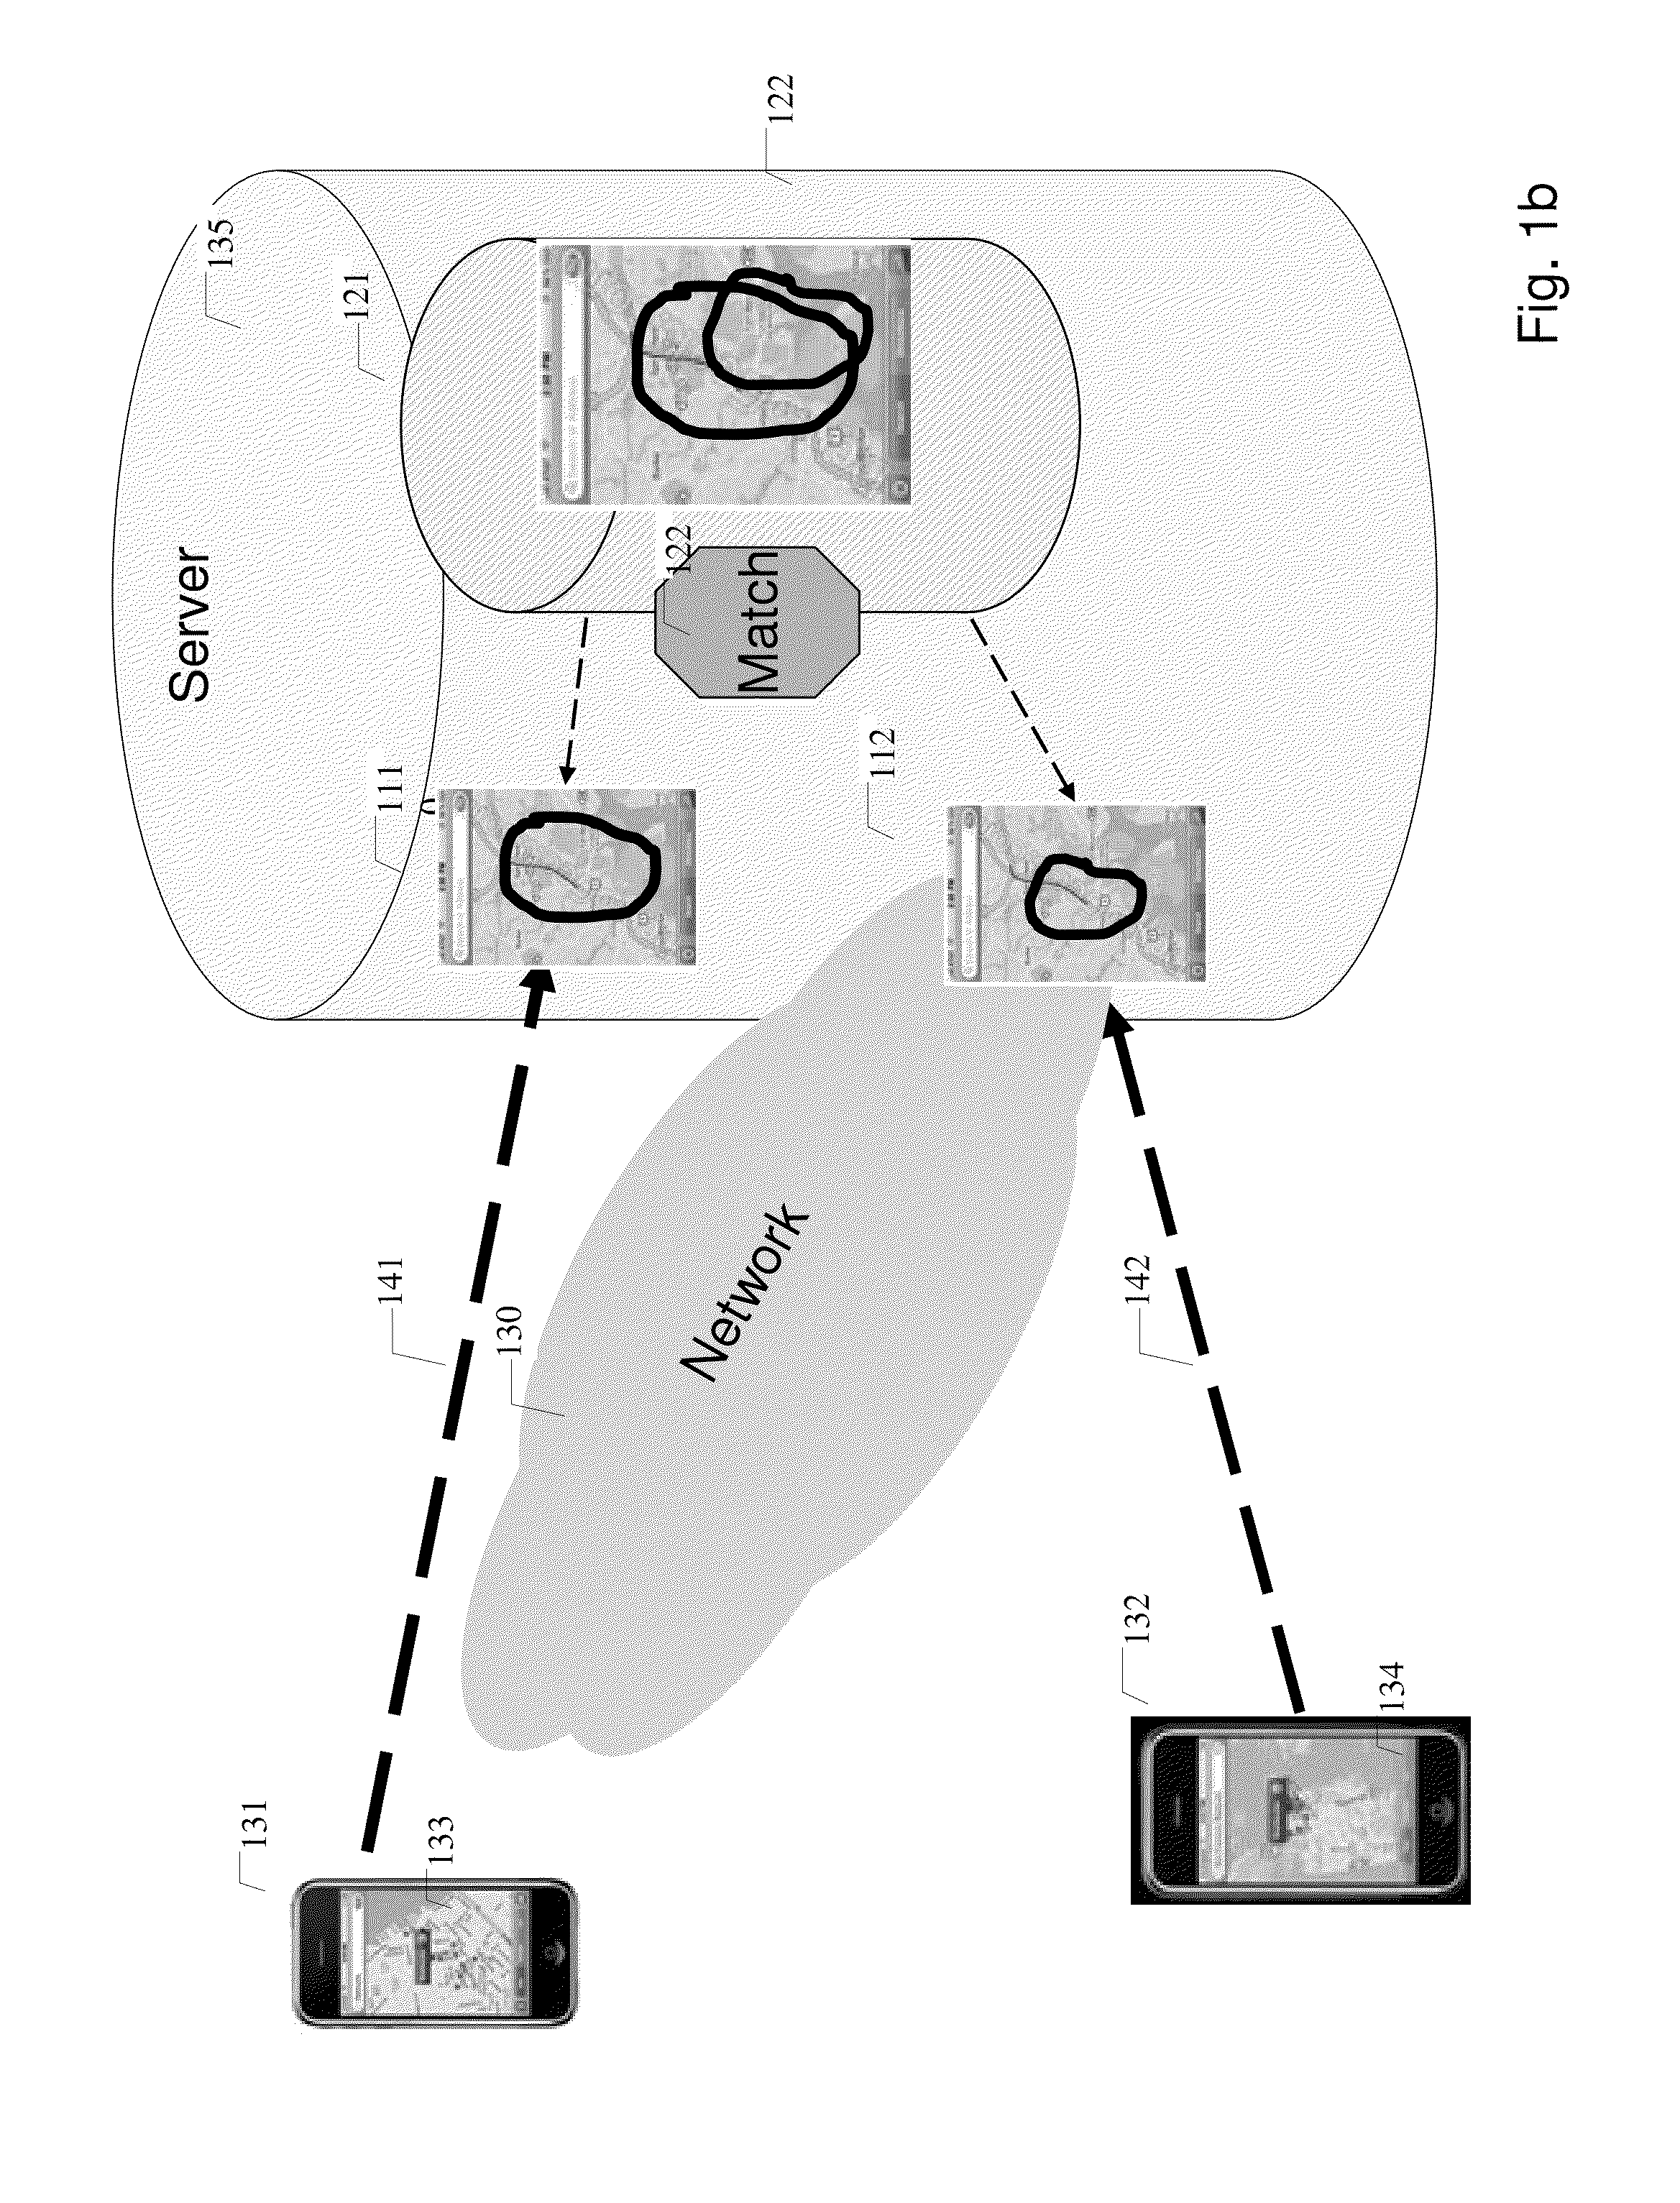 System and methods of location based service for people interaction